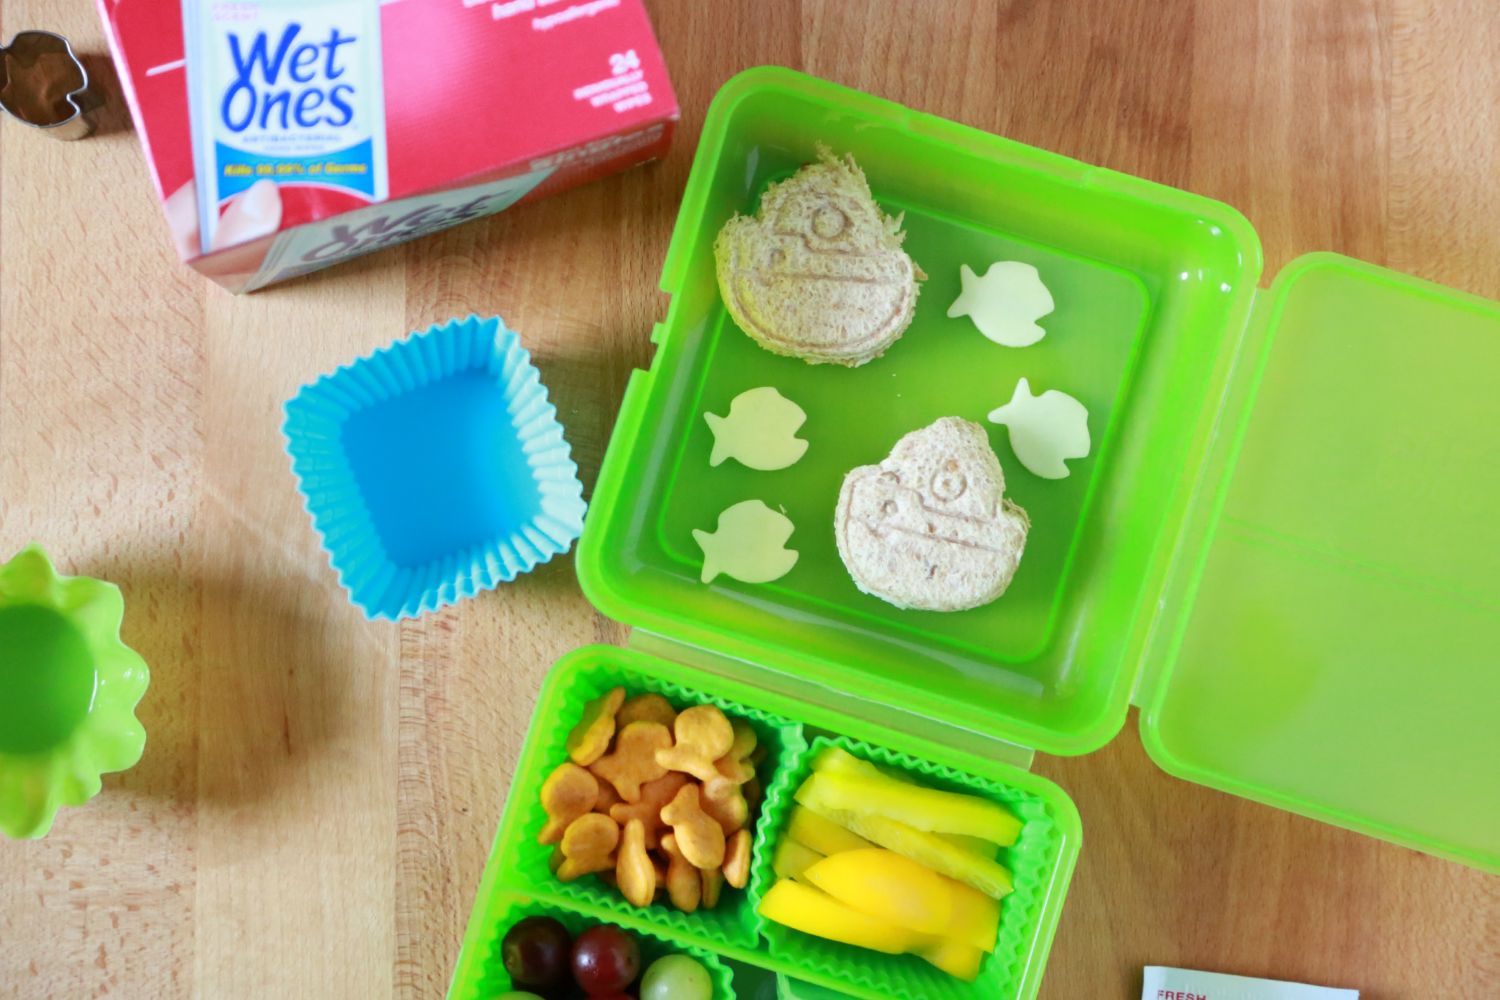 I'm so excited to show you how to create a fun Goldfish Bento Lunch for your child.